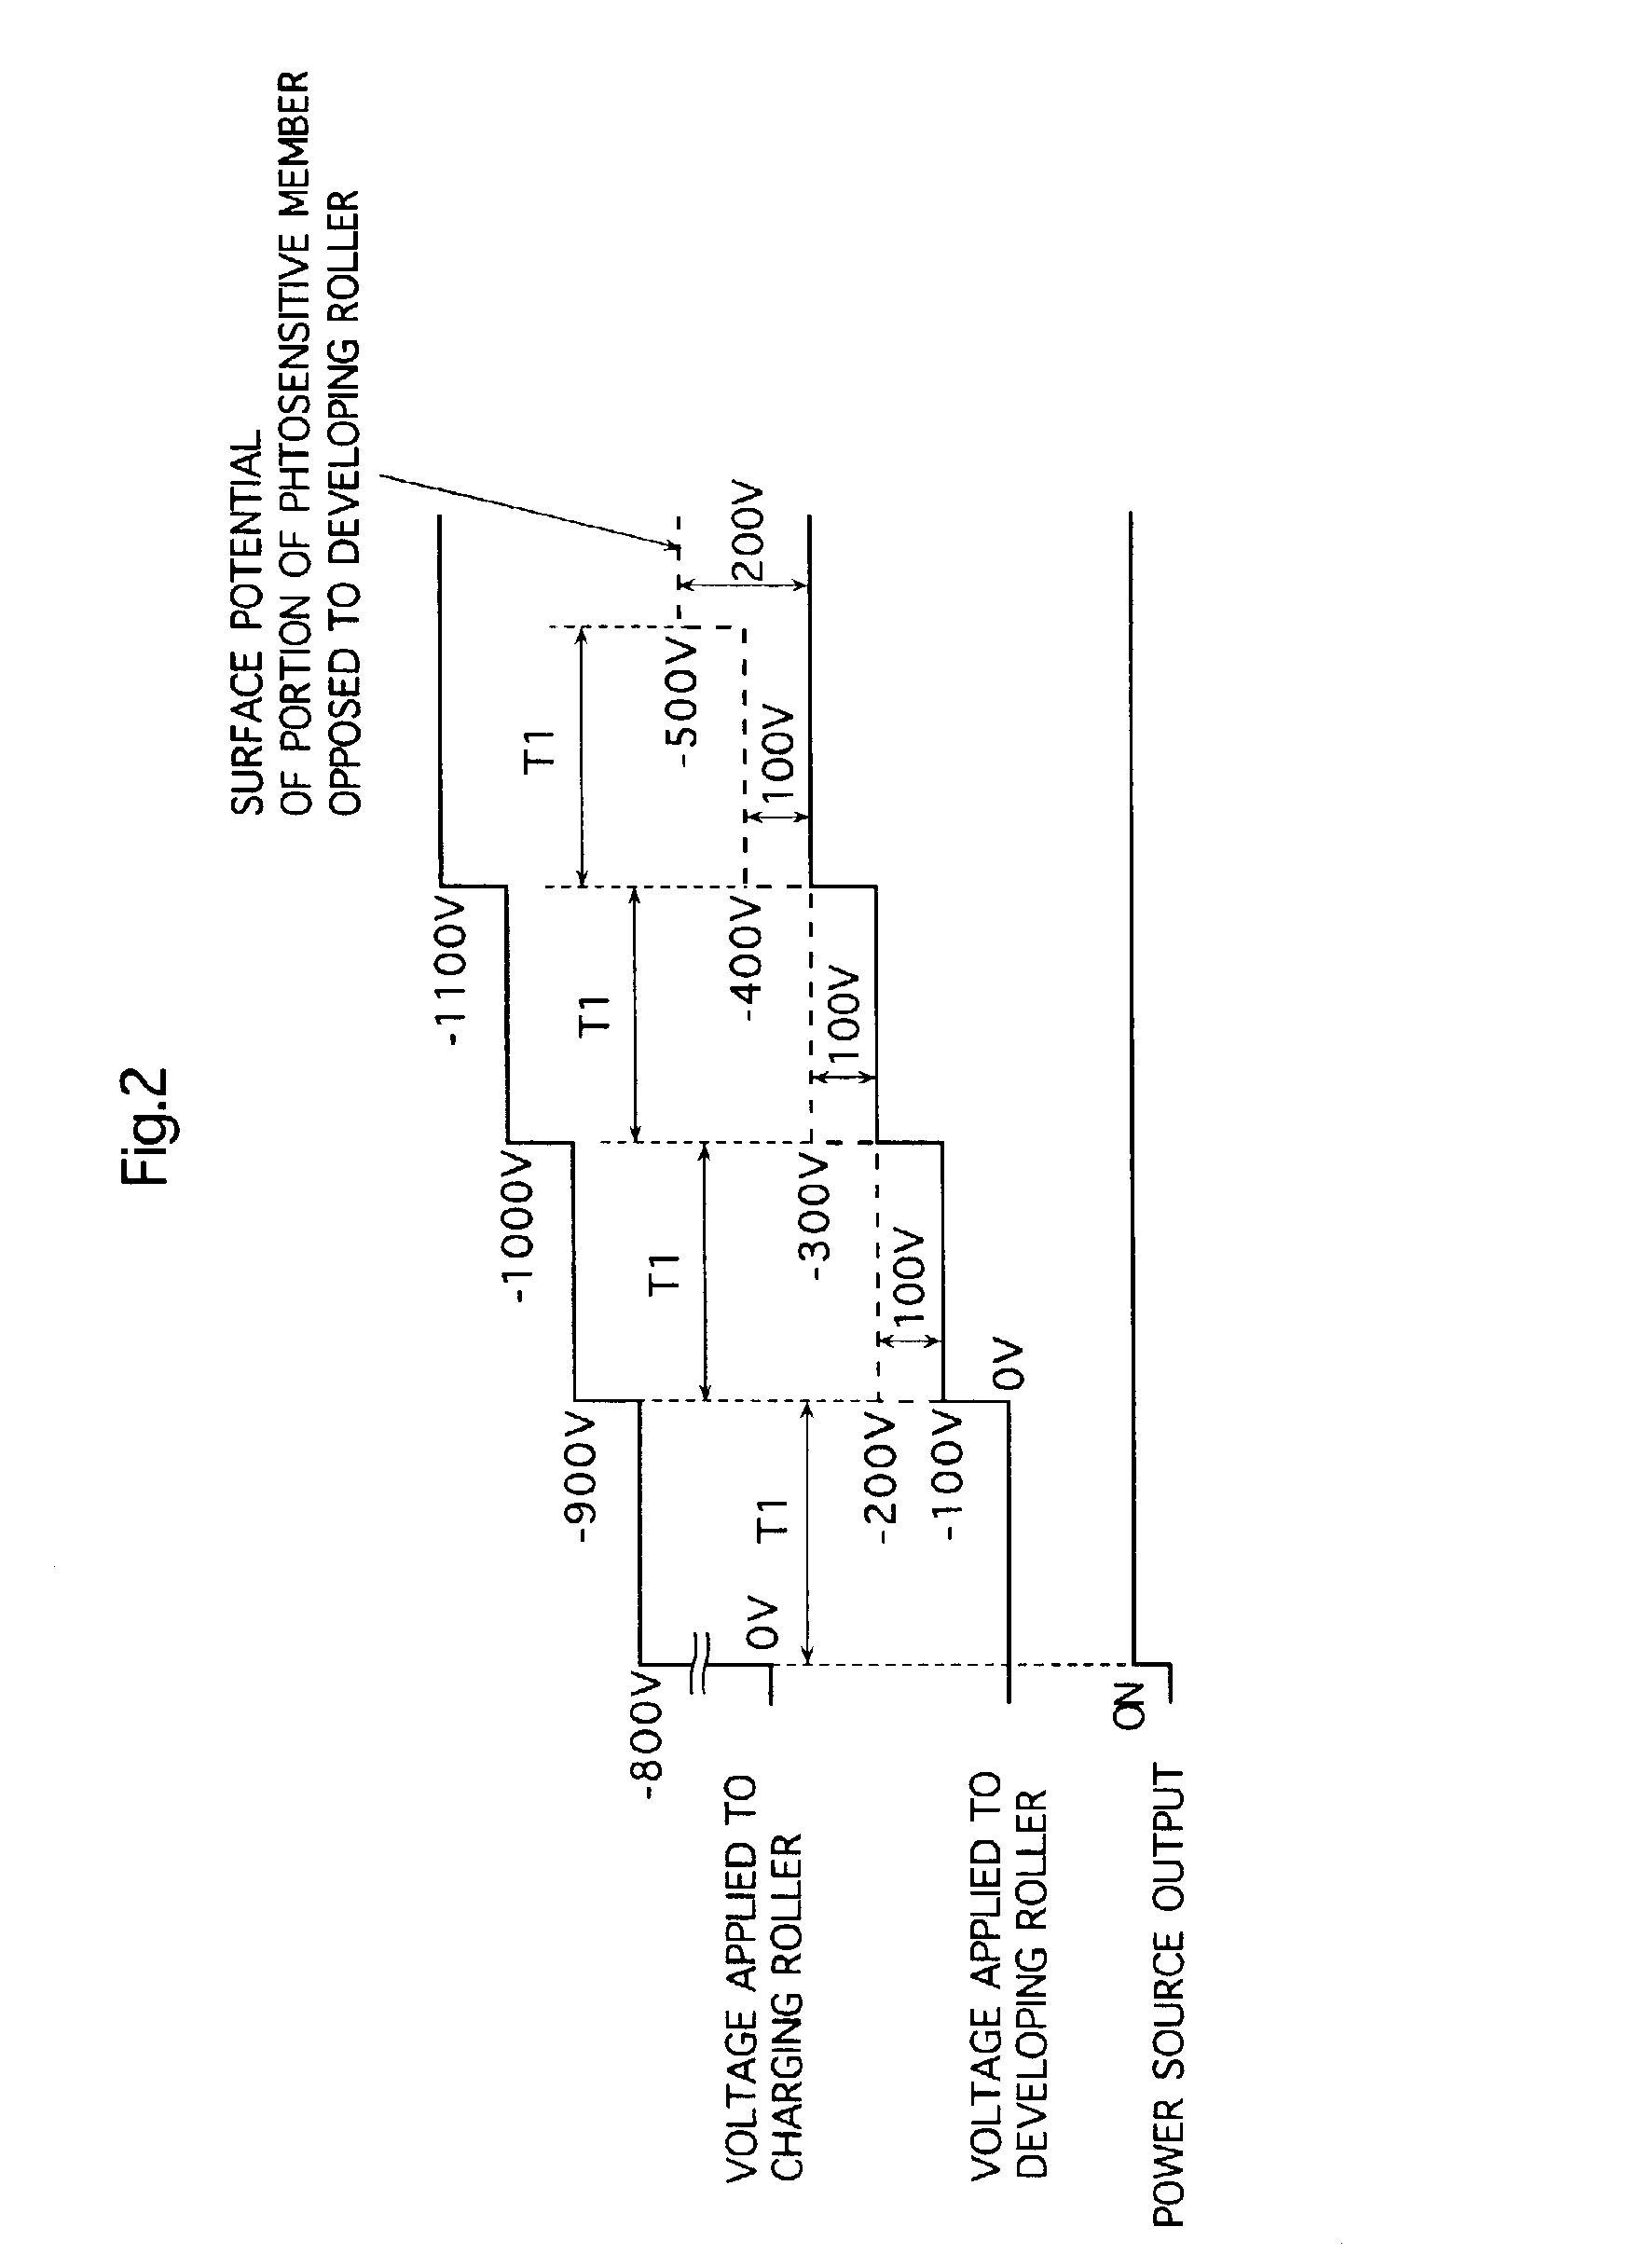 Image forming method and image forming apparatus for suppressing movement of developer onto the electrostatic latent image carrier when the voltages applied to the charging and developing devices are raised or lowered